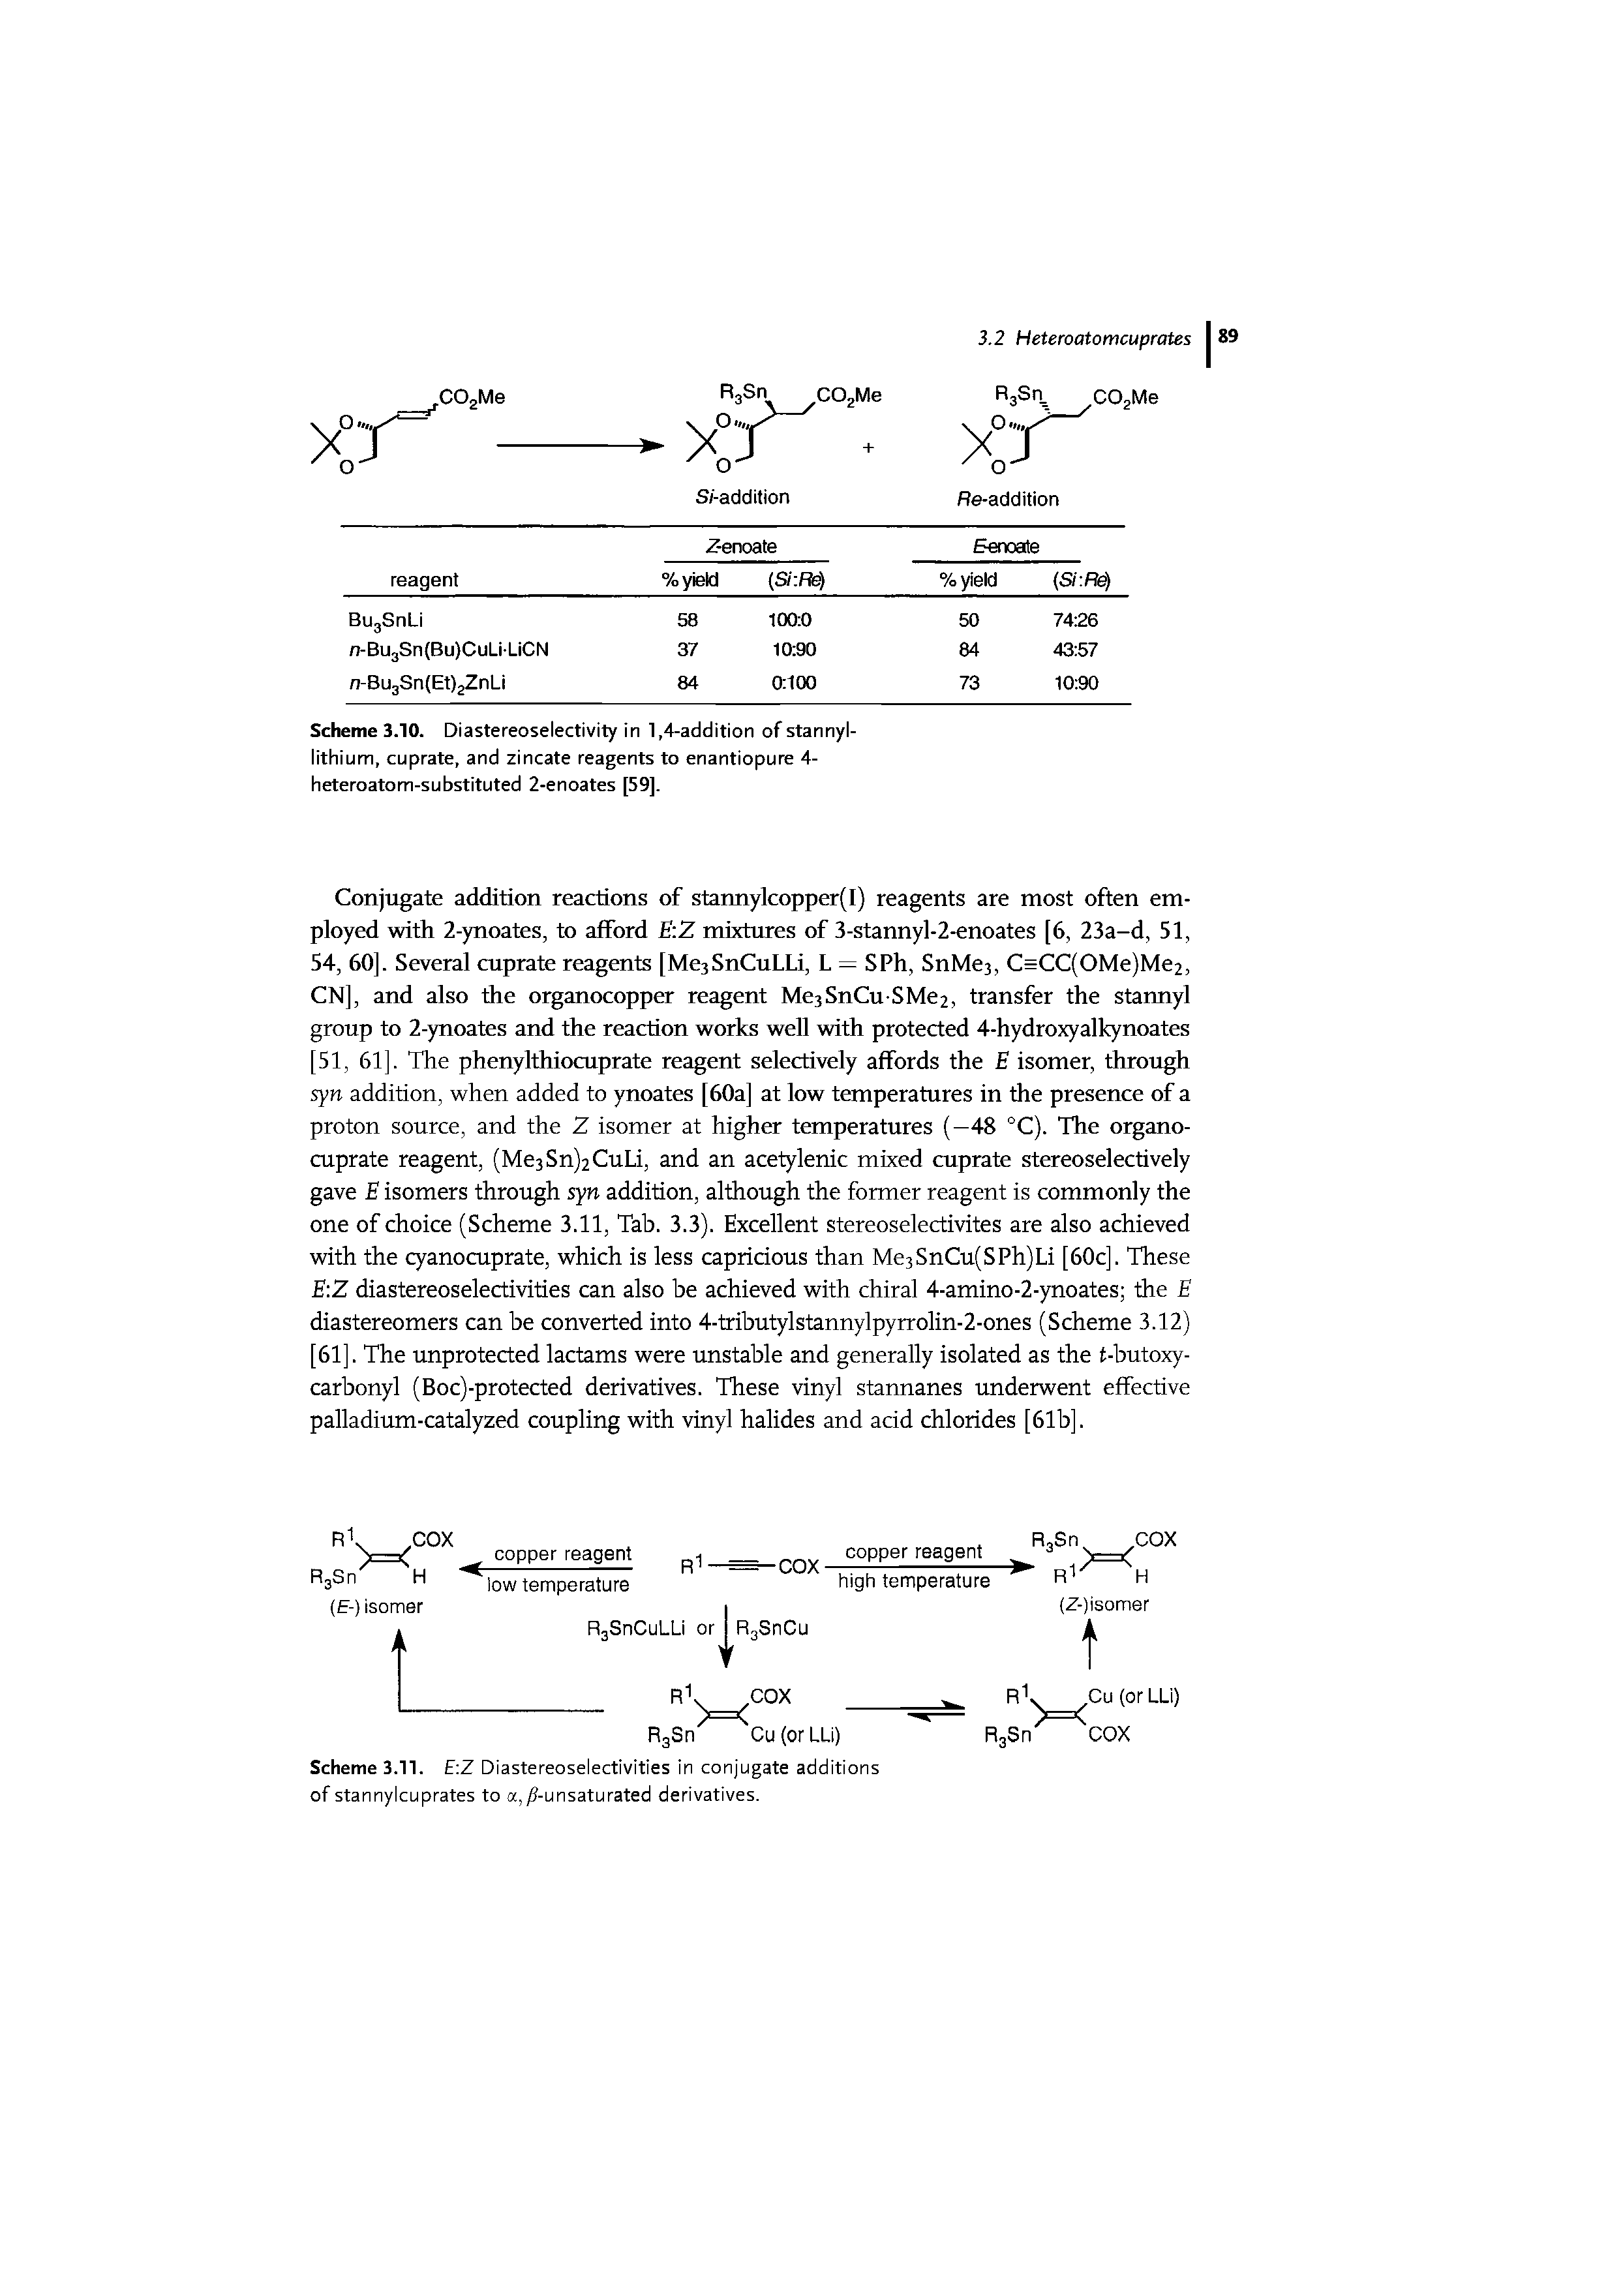 Scheme 3.10. Diastereoselectivity in 1,4-addition of stannyl-lithium, cuprate, and zincate reagents to enantiopure 4-heteroatom-substituted 2-enoates [59],...